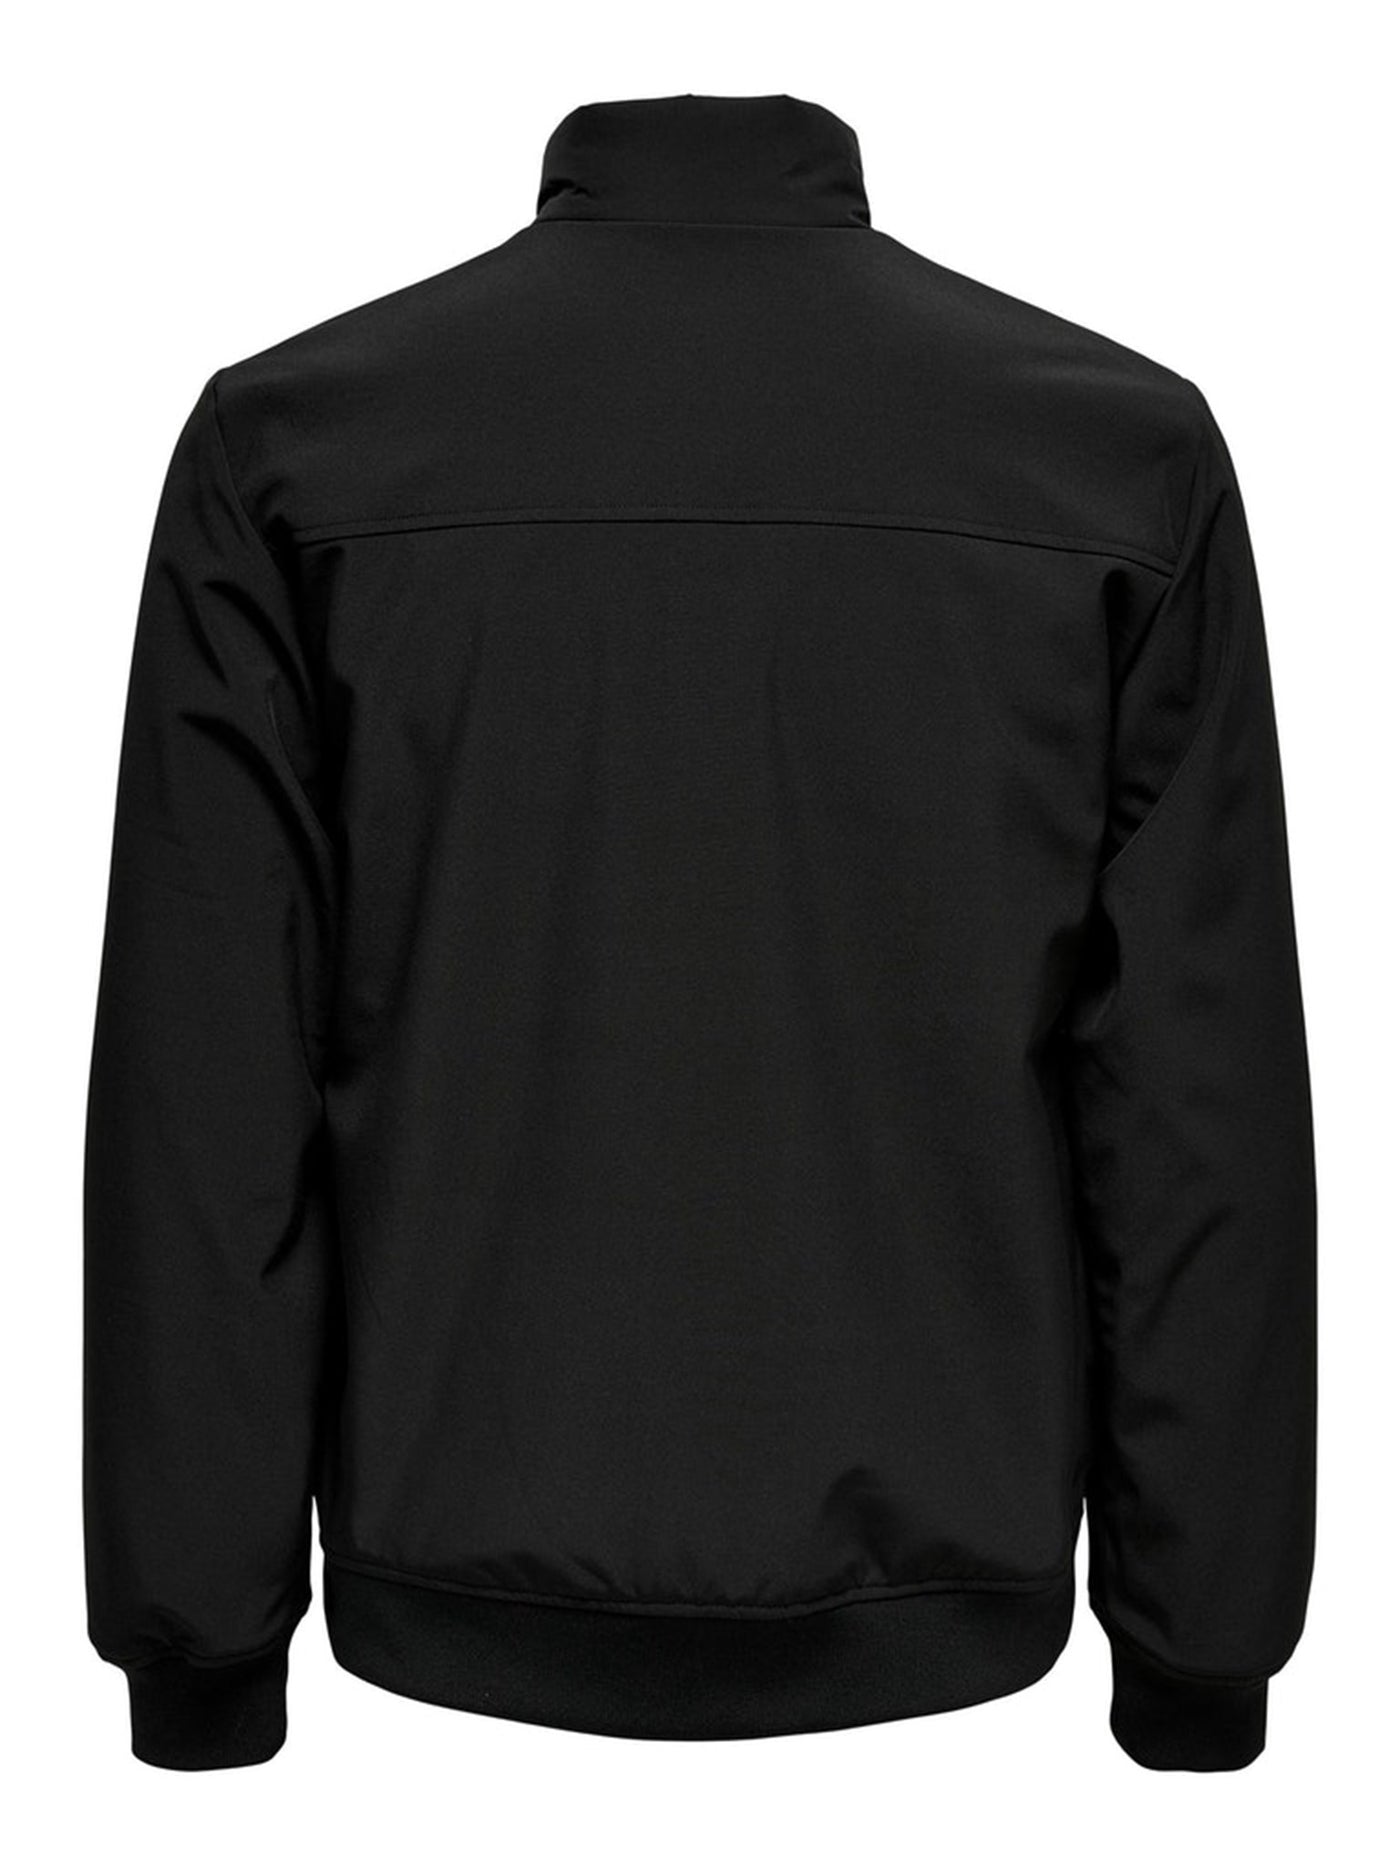 Gerry Mix Jacket - Black - Only & Sons - Black 2